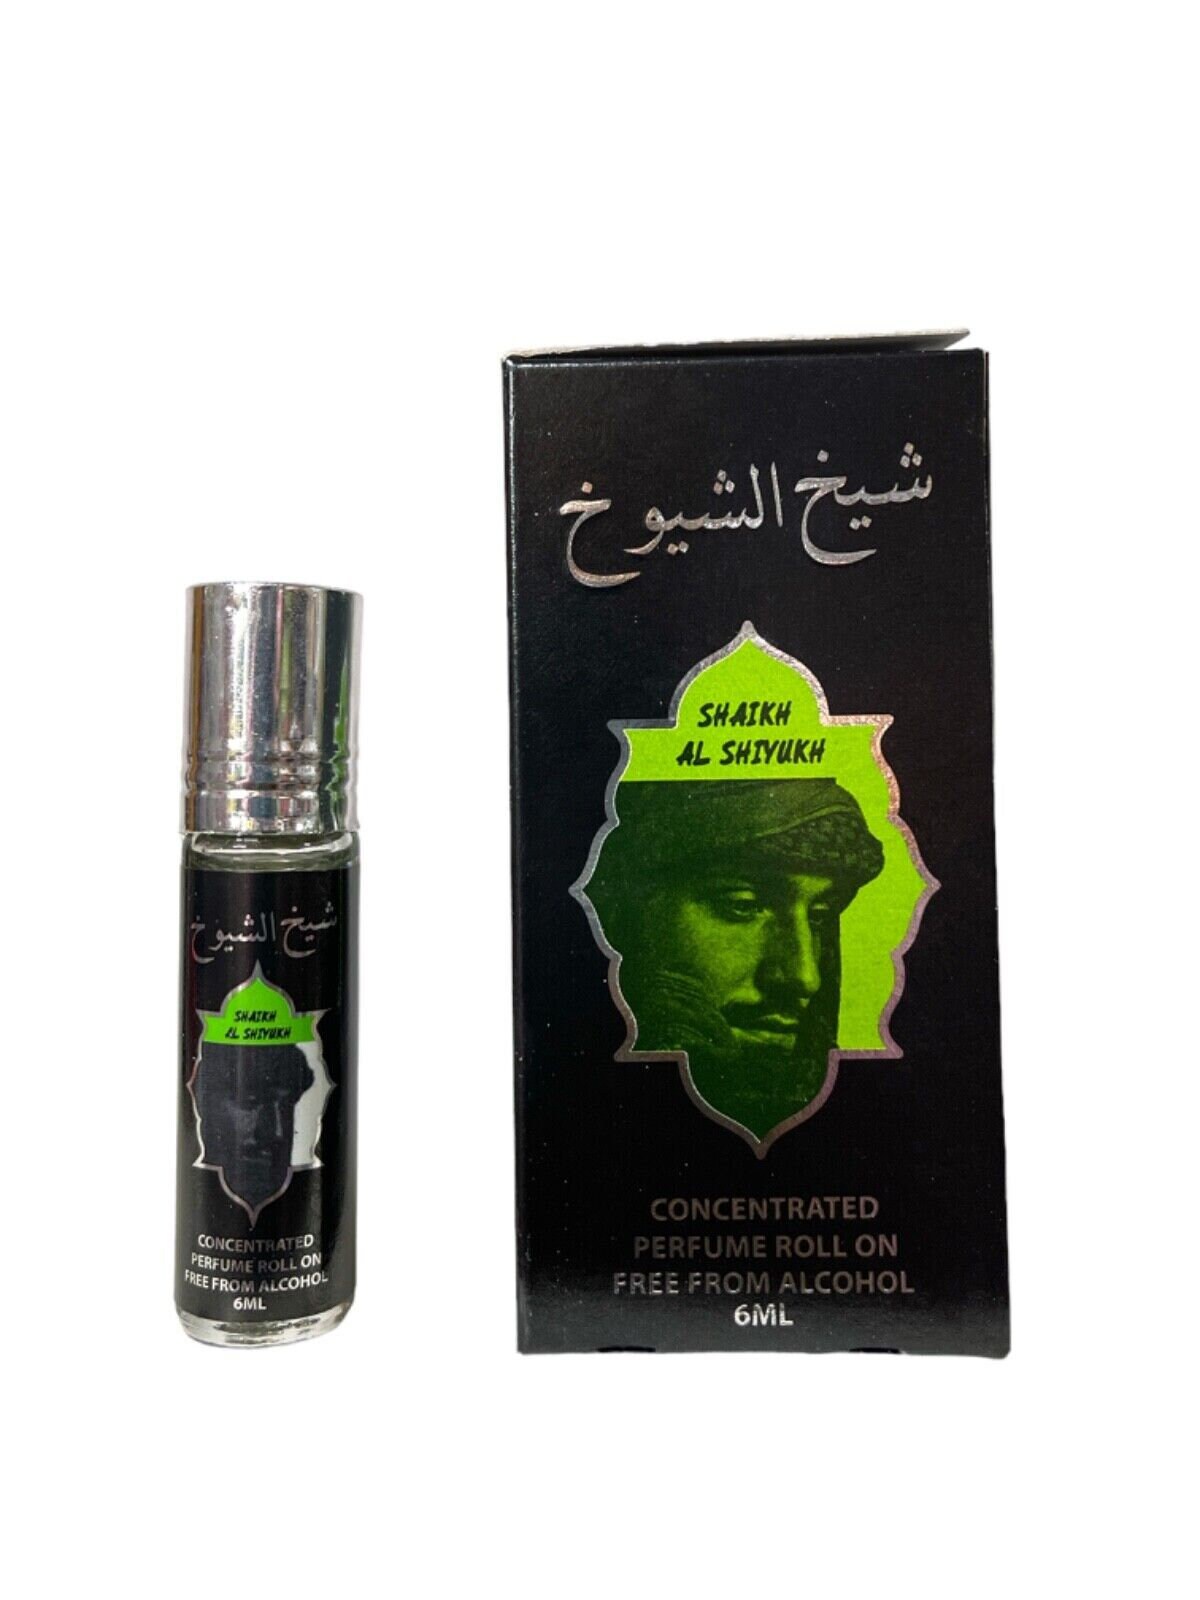 Arabian Oud Professional Grade Fragrance Oil for Candles